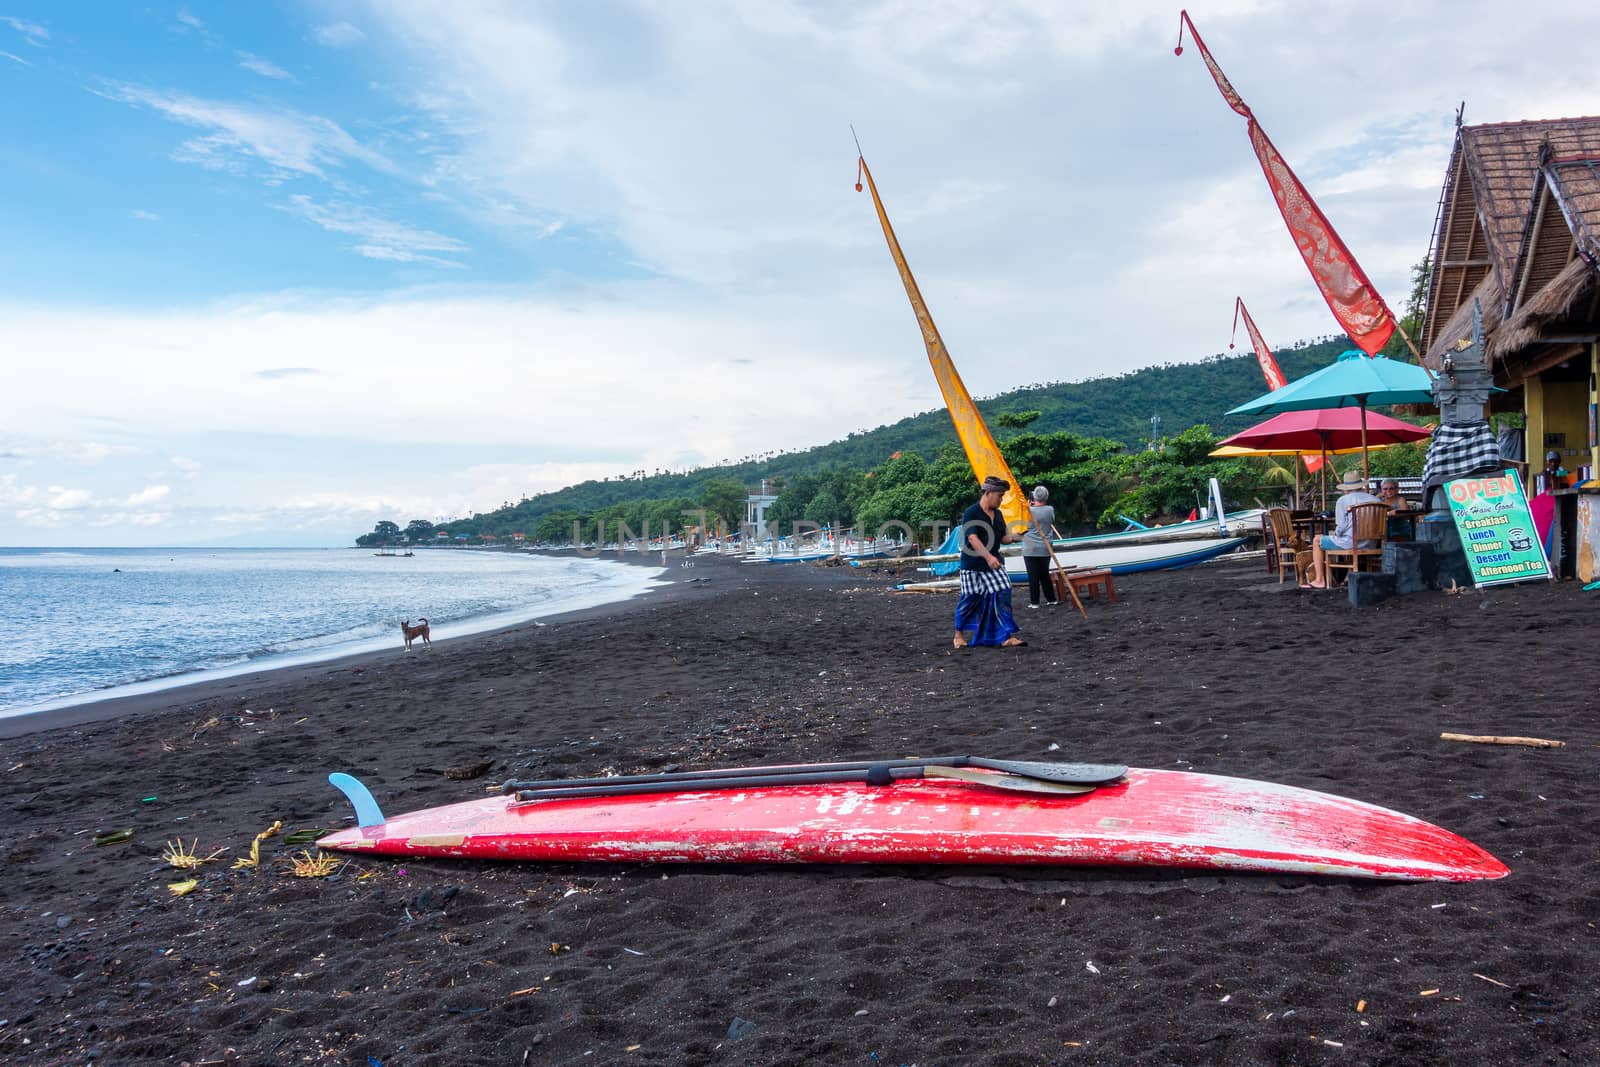 Red paddle board on the black sand beach in Amed, Bali, Indonesia